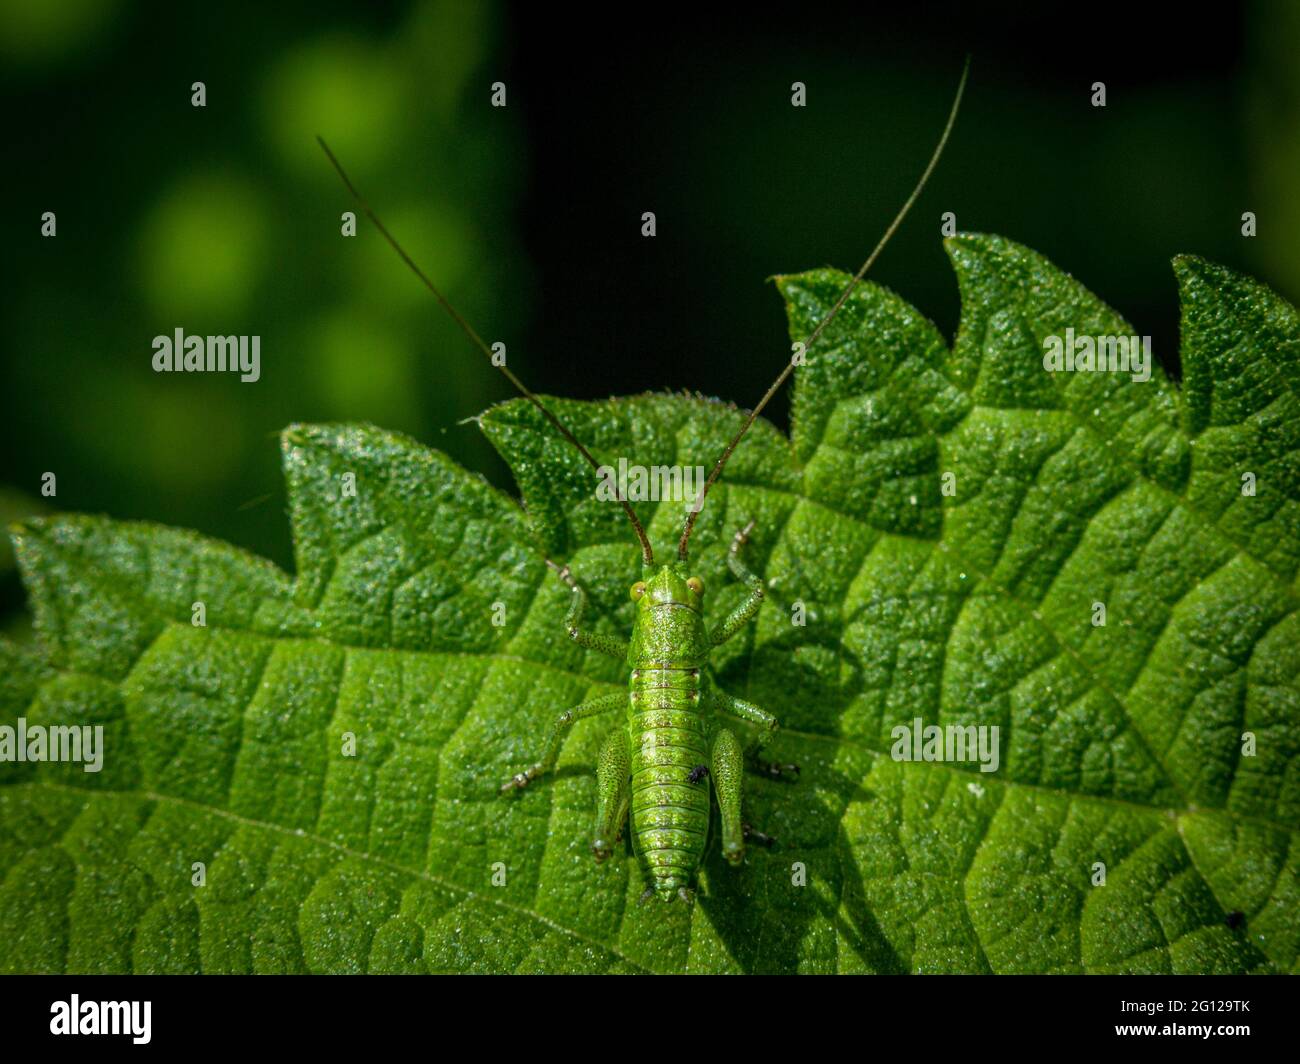 Small green long-horned grasshopper or bush cricket camouflaged on a leaf viewed from overhead in close up Stock Photo